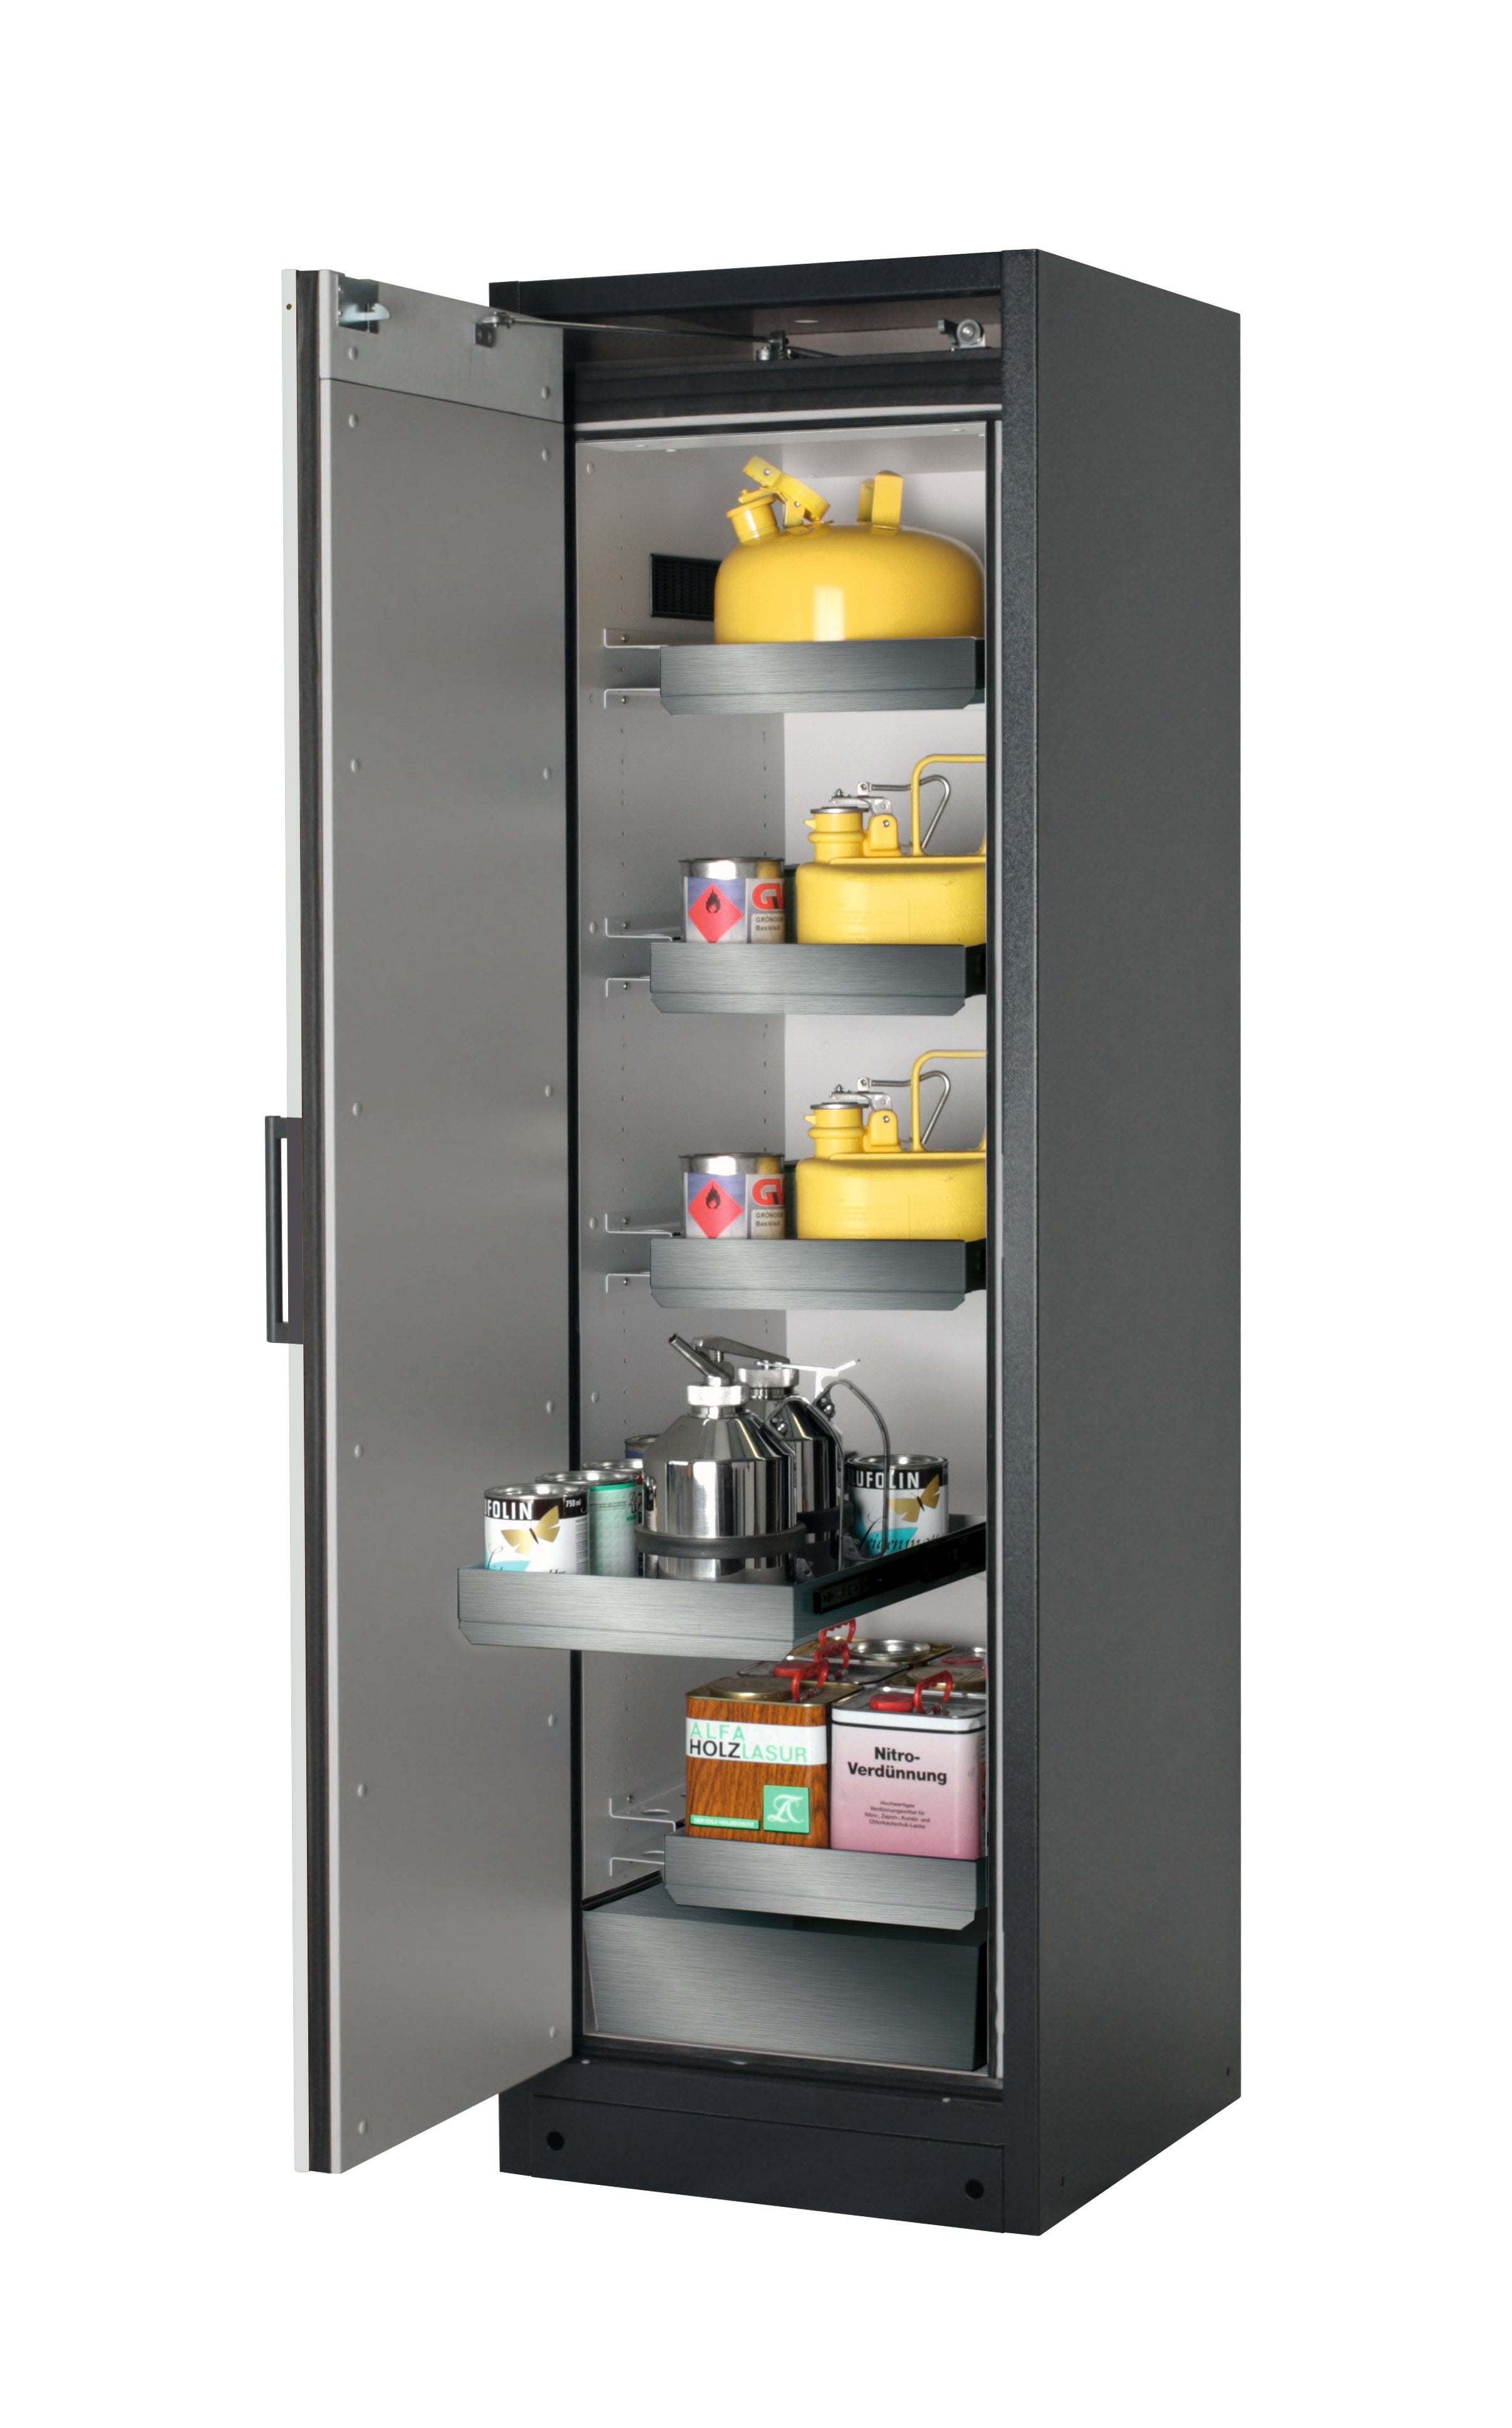 Type 90 safety storage cabinet Q-PEGASUS-90 model Q90.195.060.WDAC in light grey RAL 7035 with 4x drawer (standard) (stainless steel 1.4301),